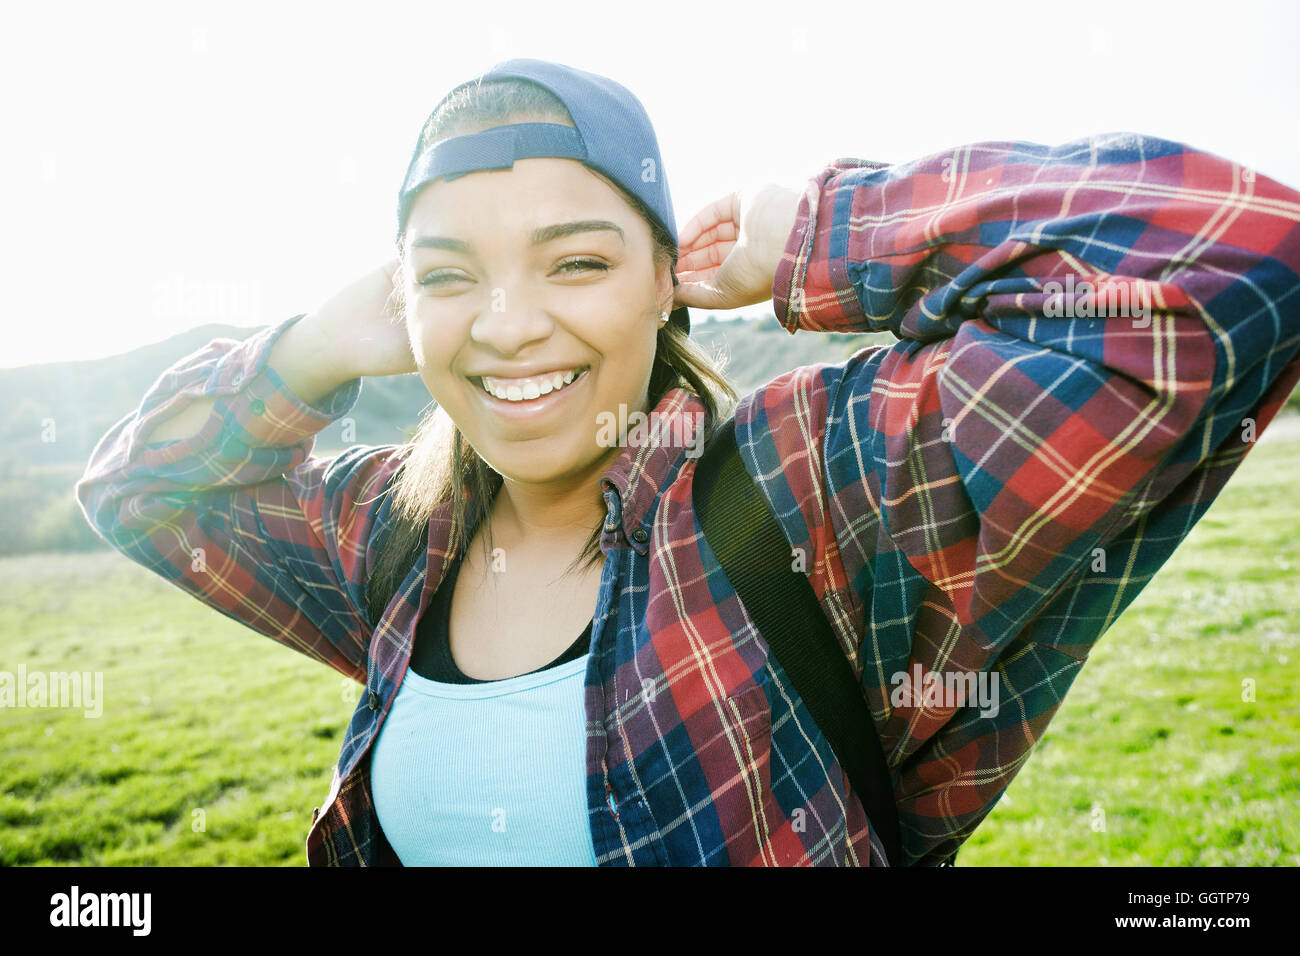 Smiling Mixed Race woman backpacking in field Stock Photo